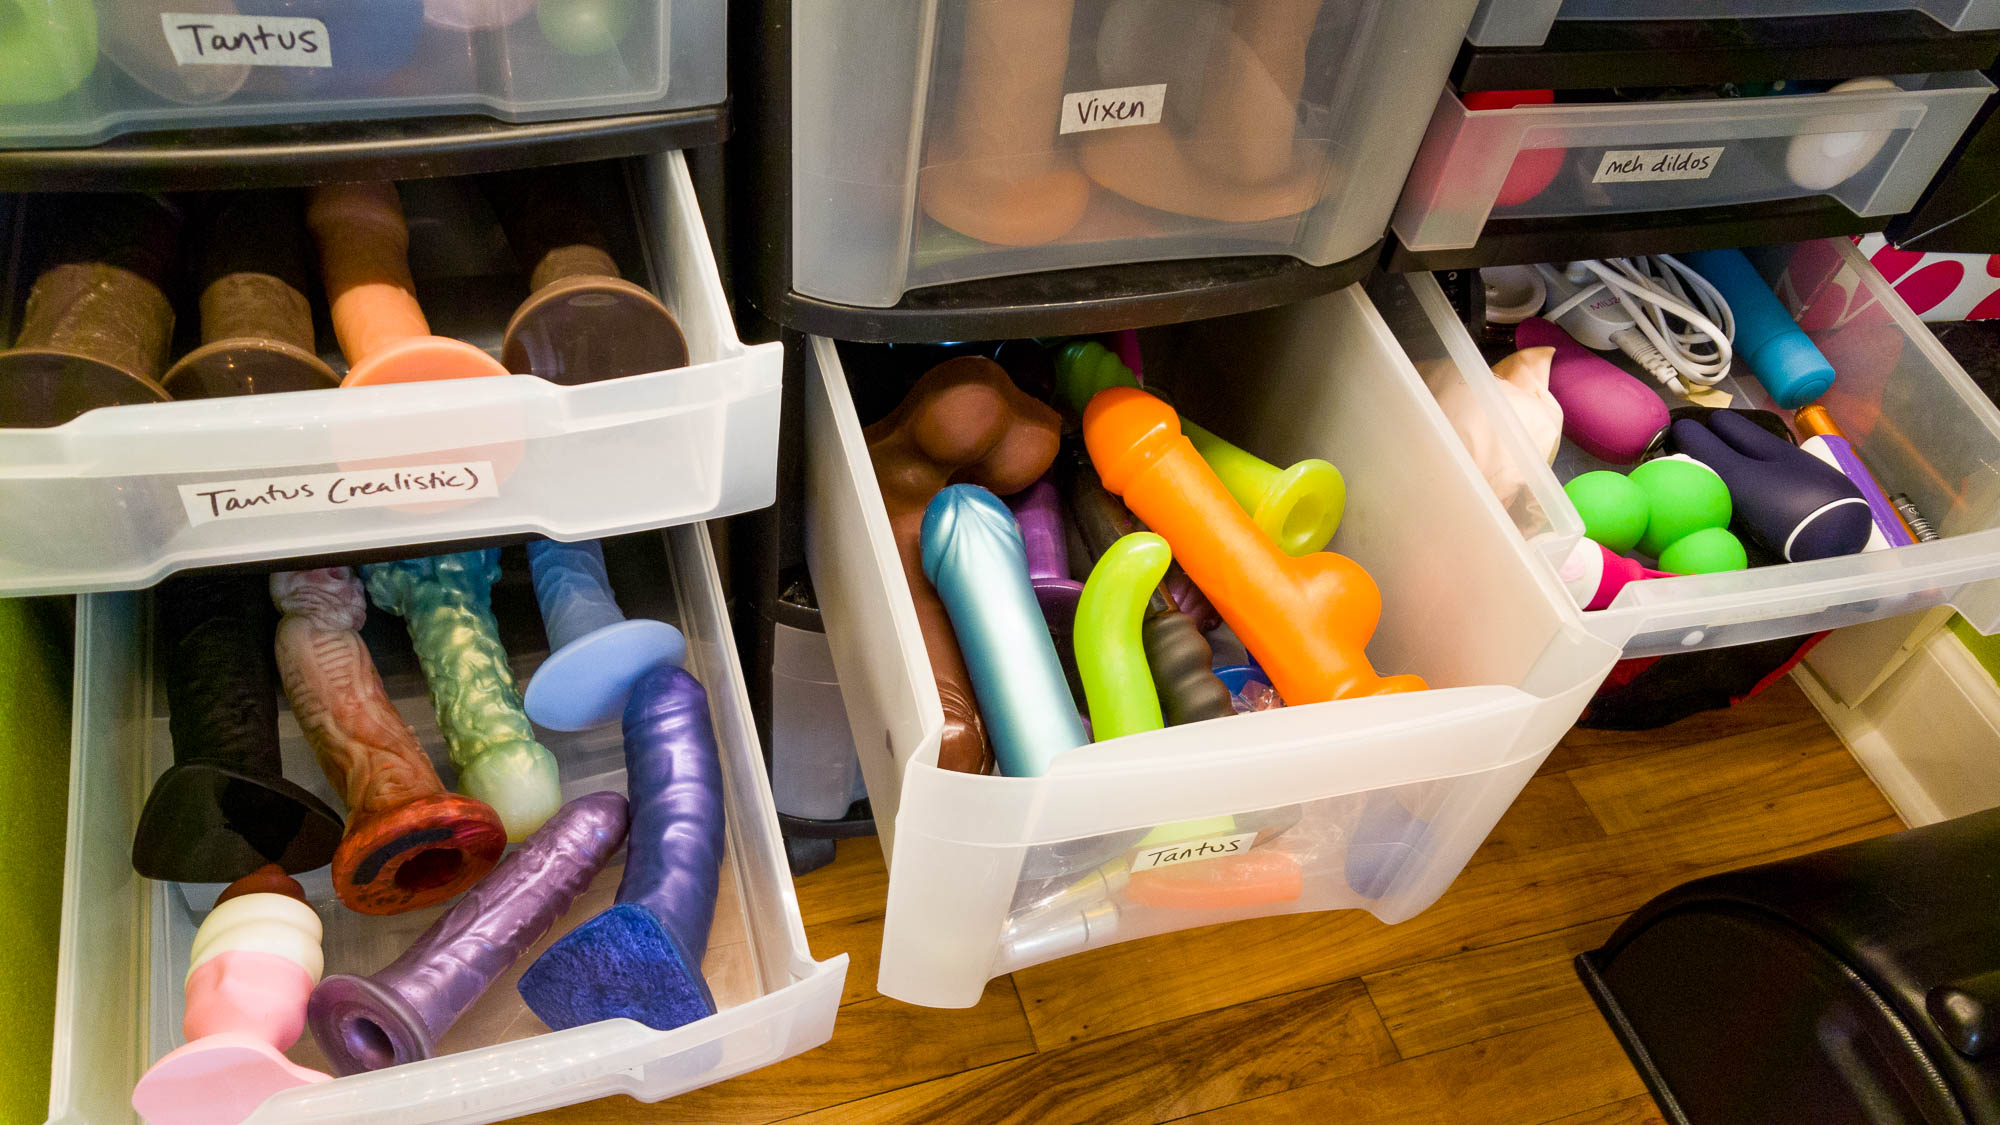 Dildo drawers in my sex toy closet.